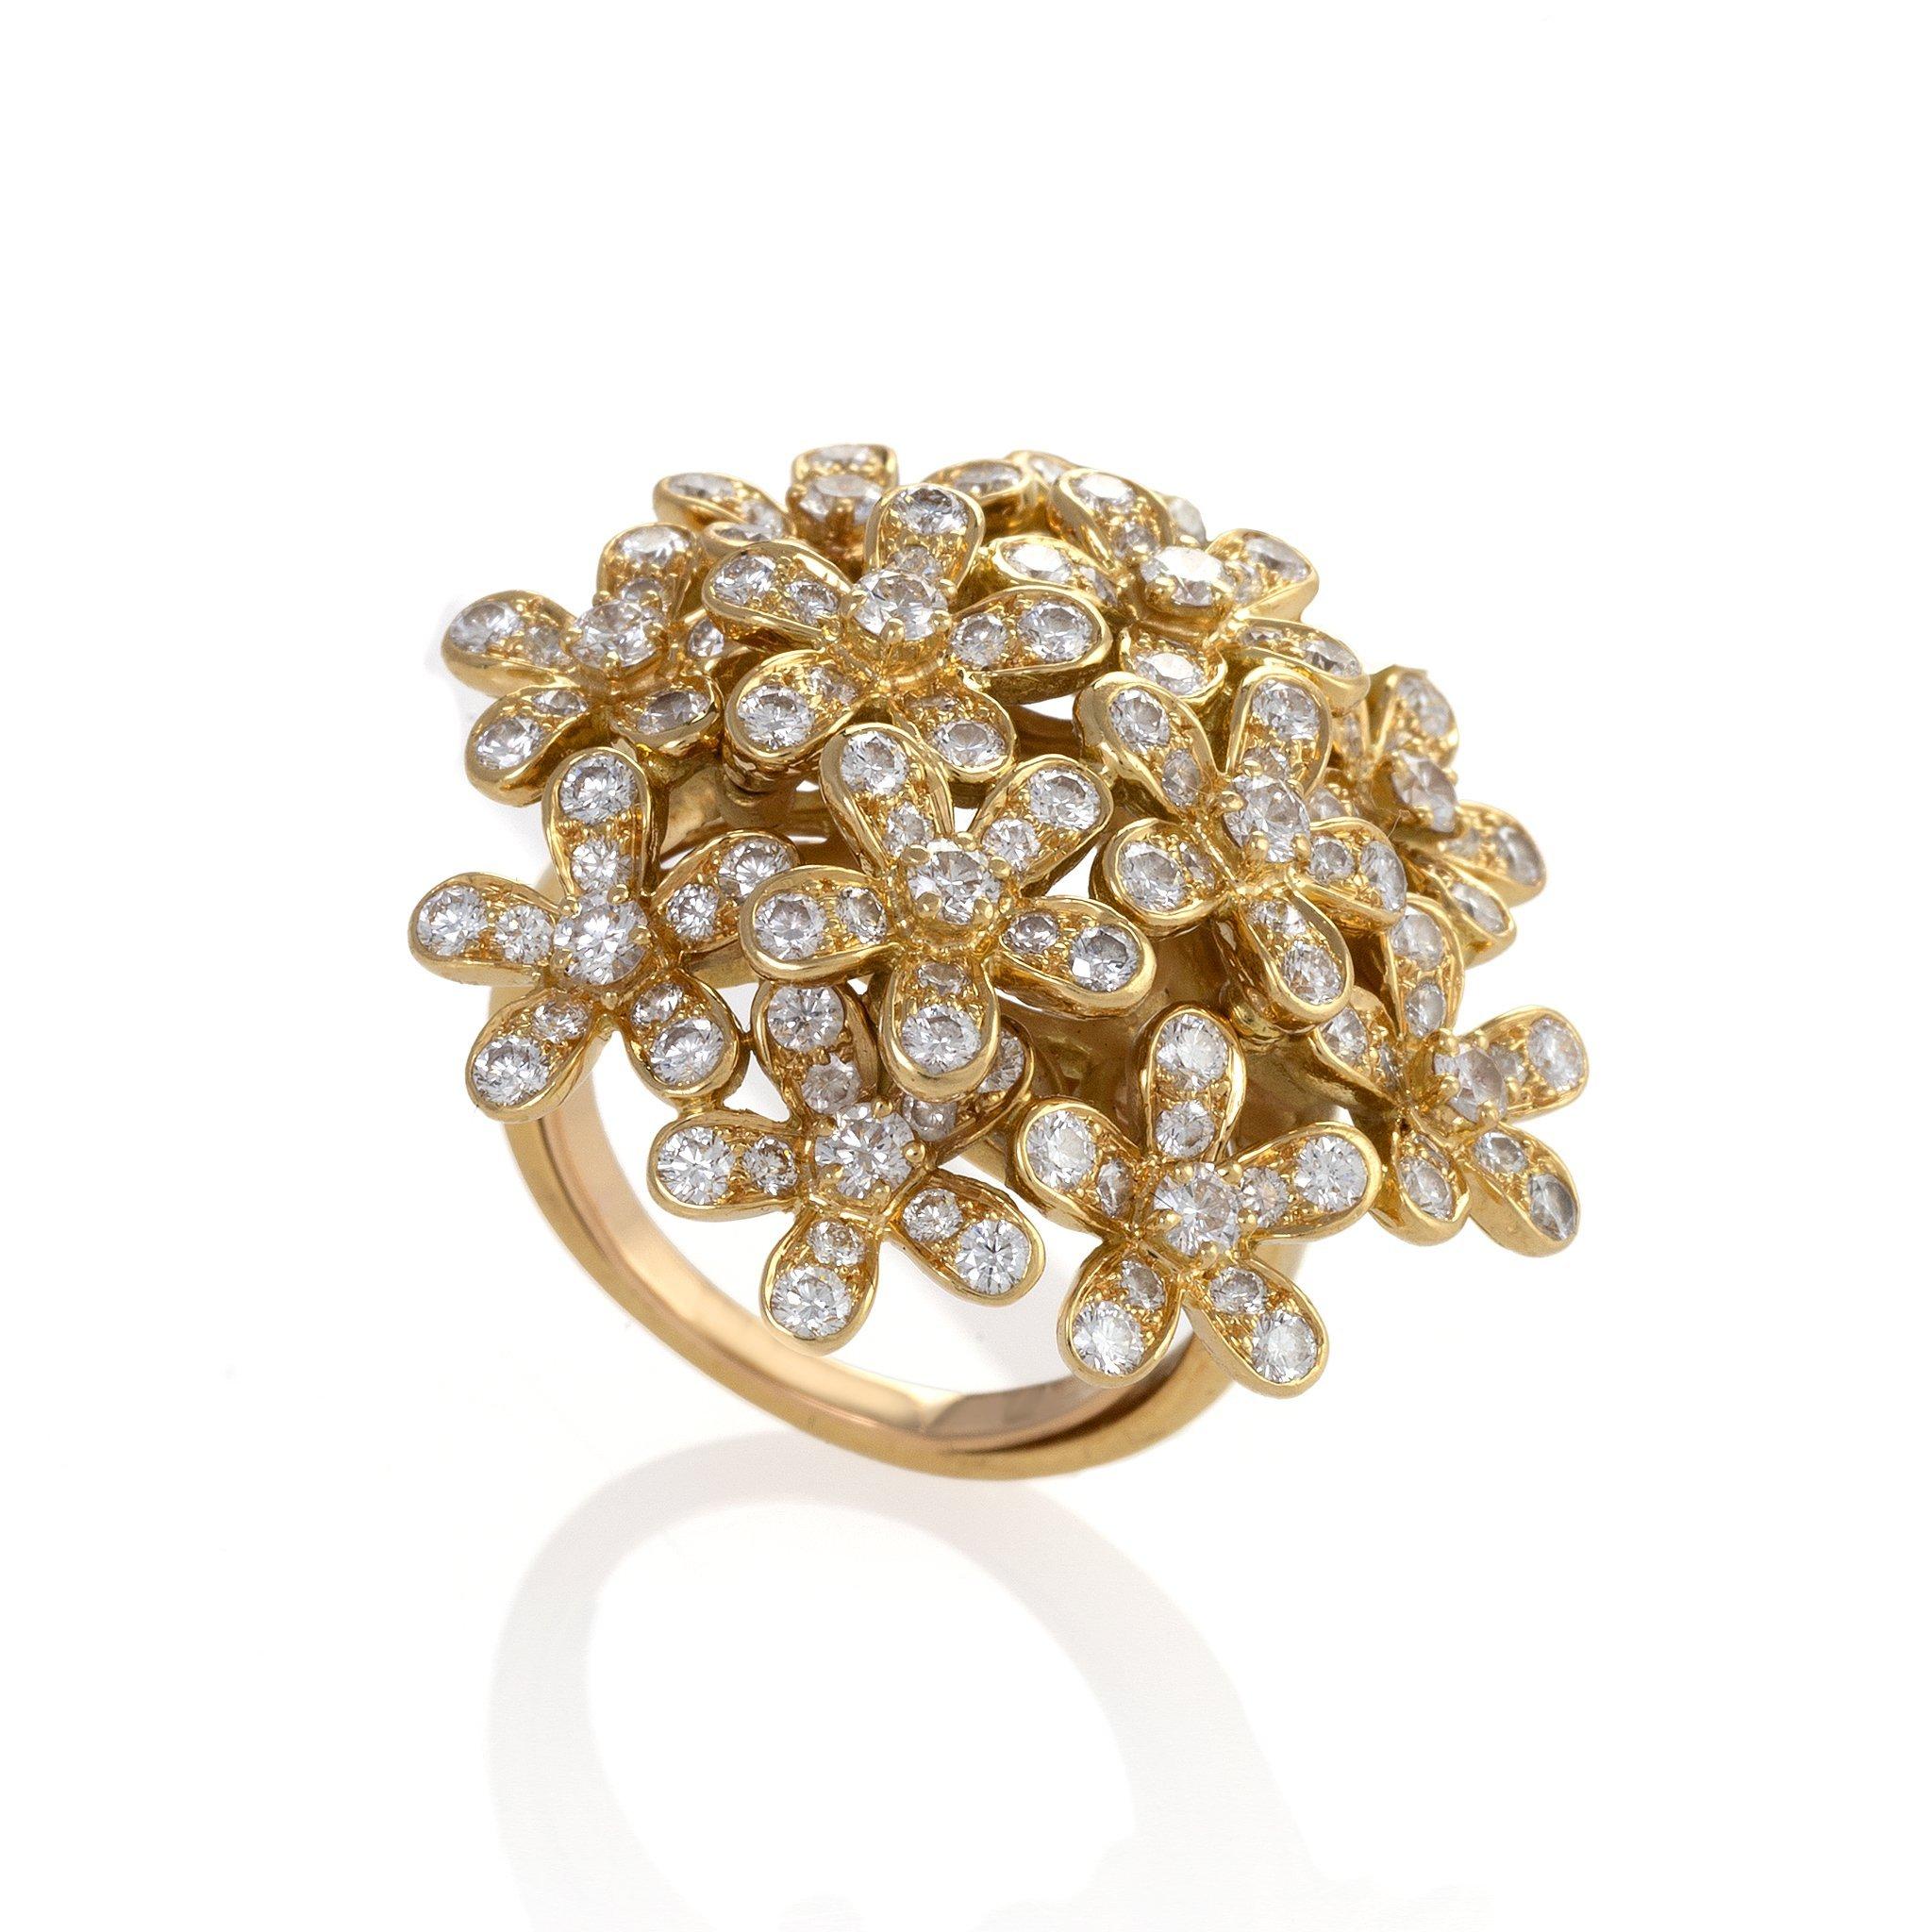 Of 21st century design, this “Socrate” ring by Van Cleef & Arpels is composed of diamonds and 18K gold. The bombé form ring is designed as a dense, naturalistic cluster of 5-petal diamond blossoms. Playful and opulent, this ring is a glittering